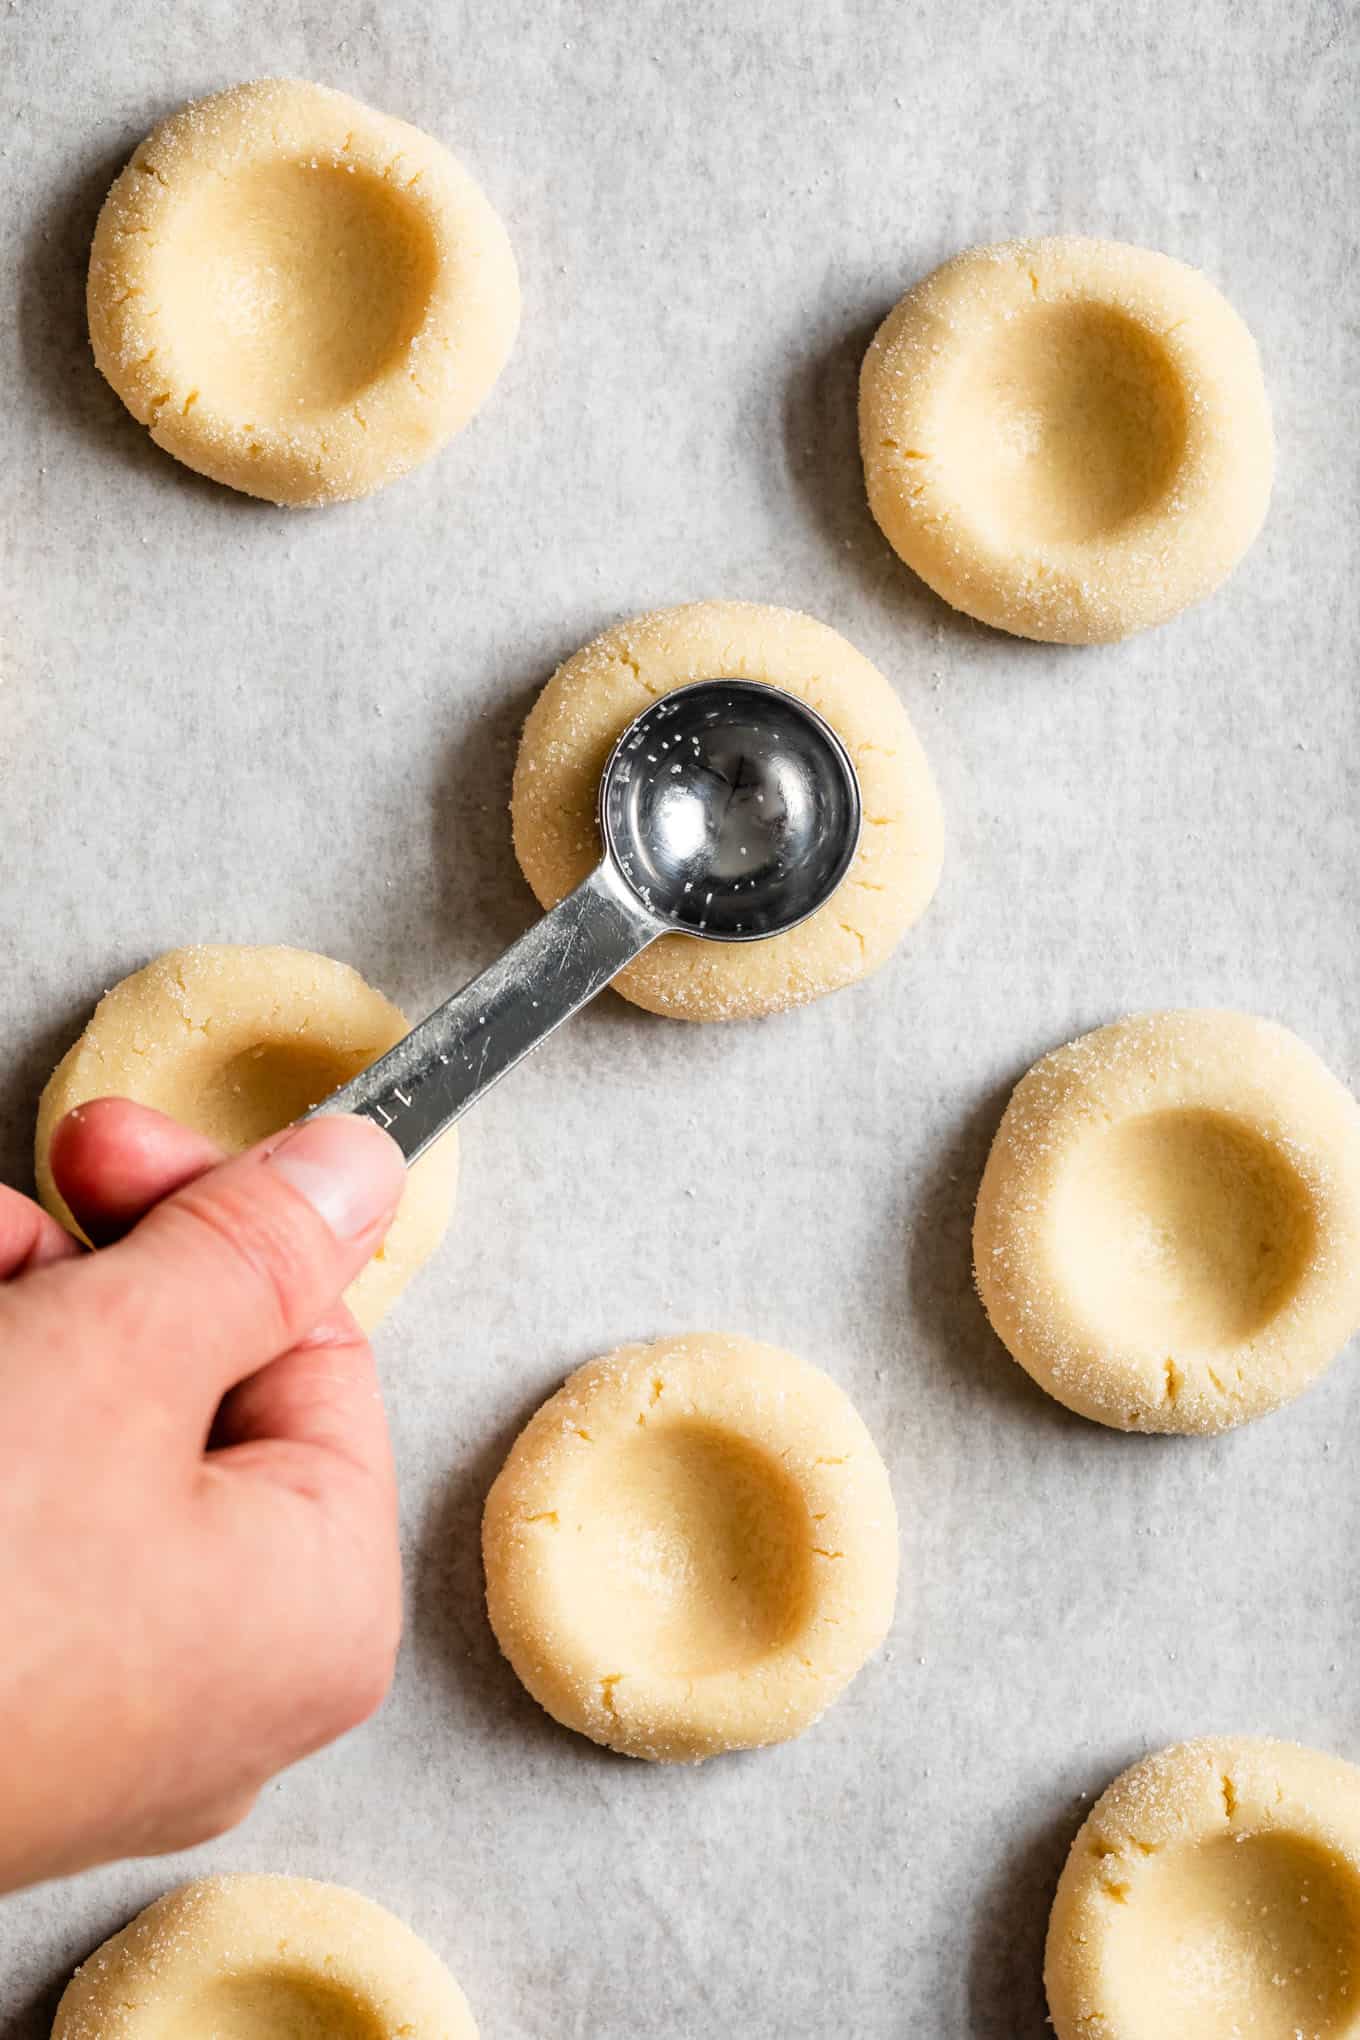 Keep Thumbprint Cookies from Cracking